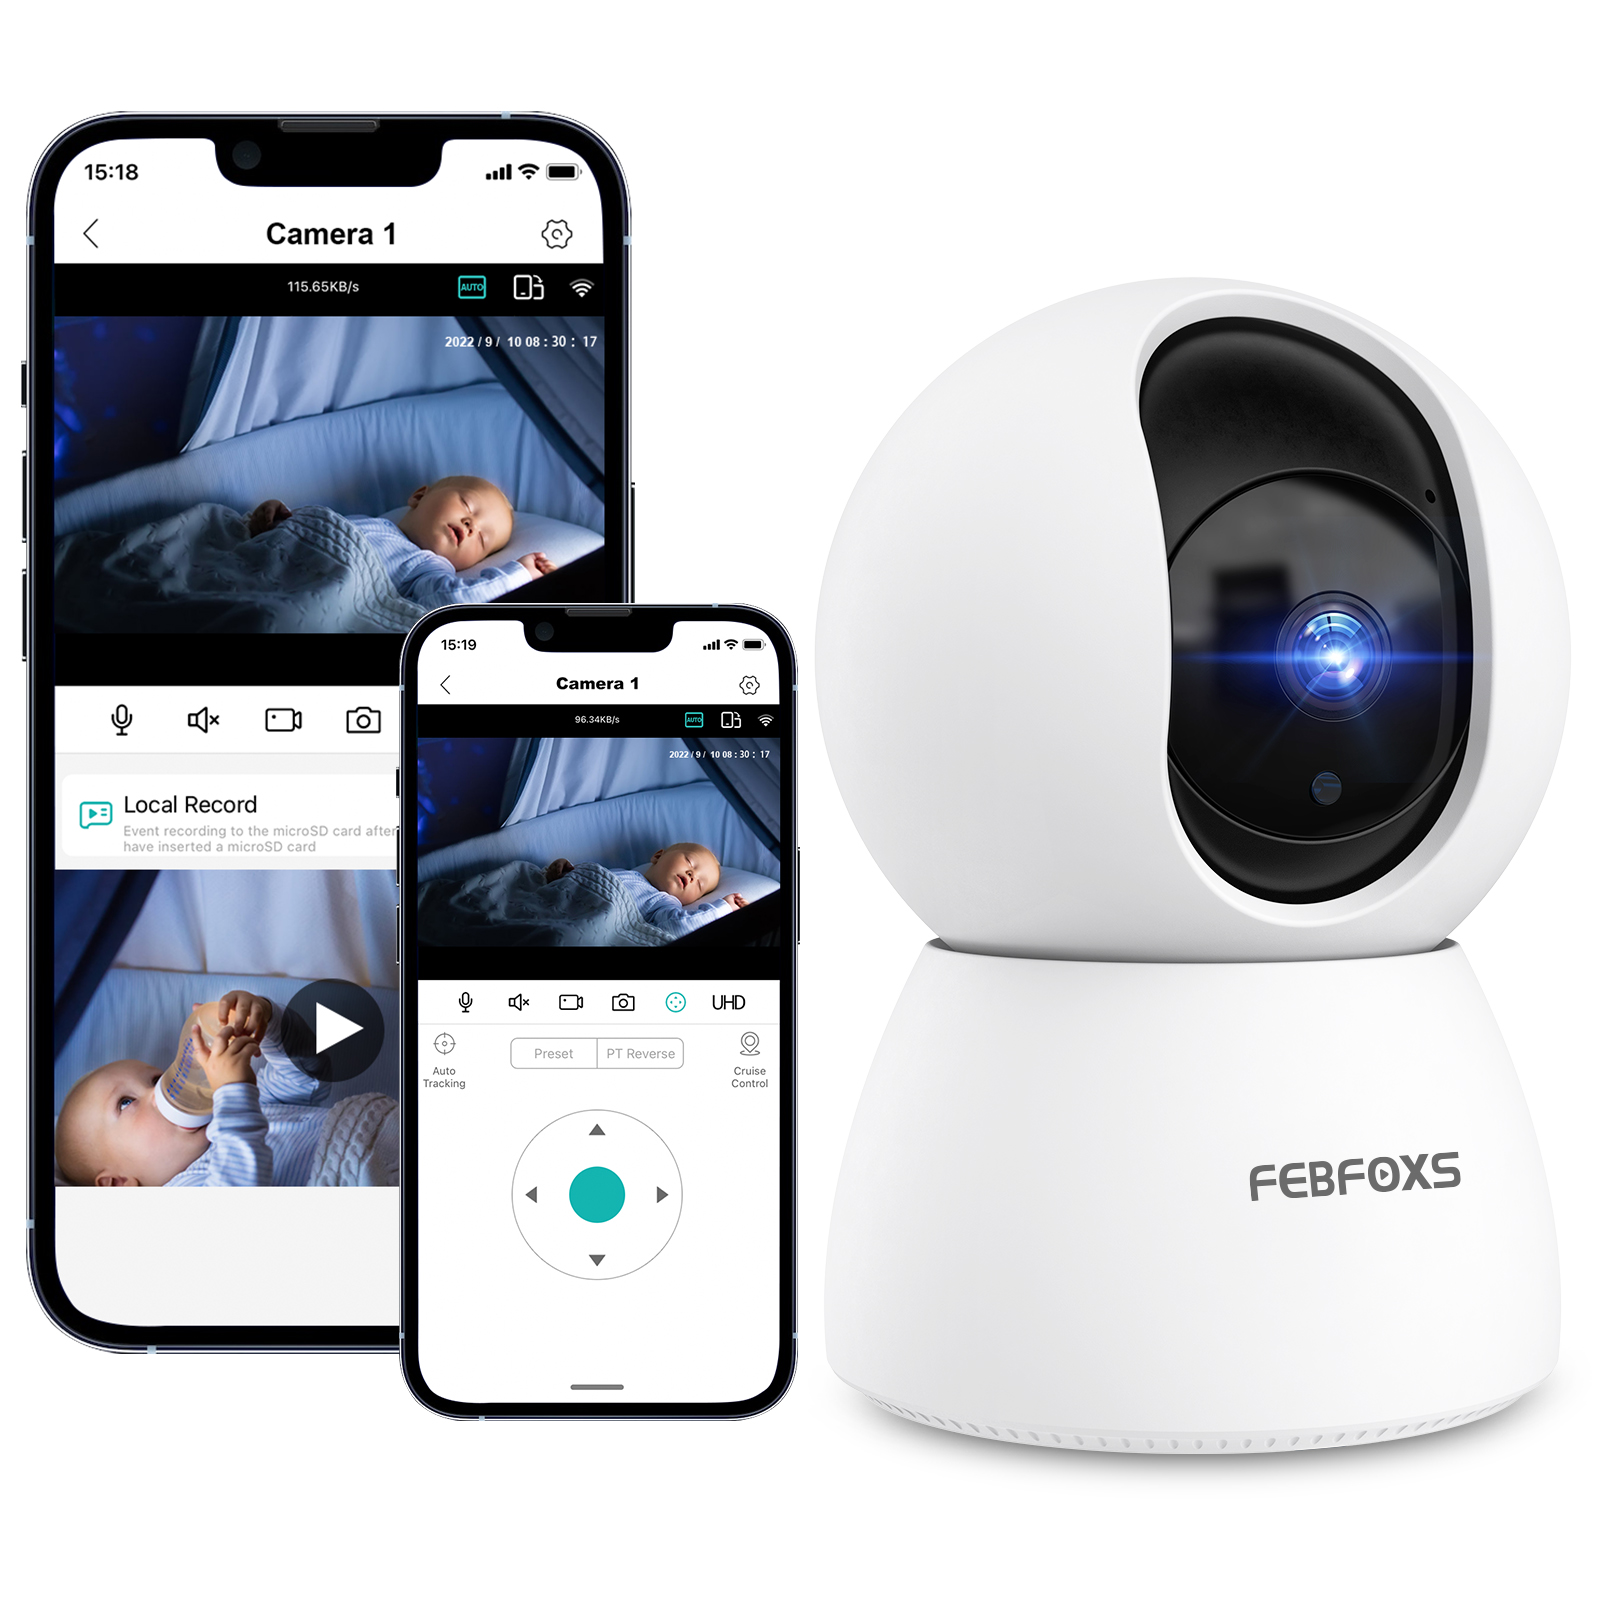 Febfoxs D305 Baby Monitor Security Camera for Home Security - image 1 of 7